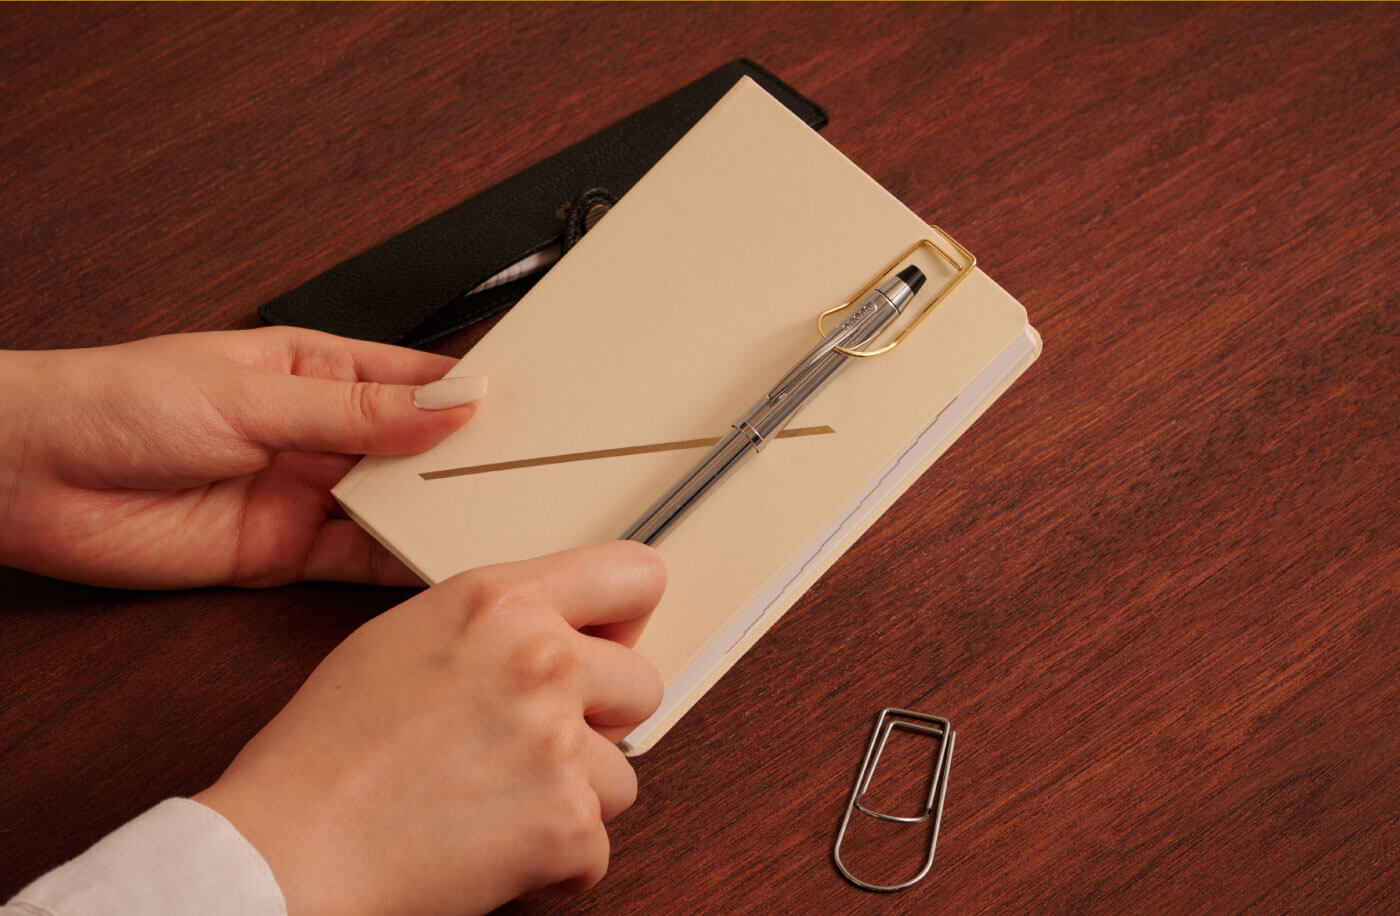 Even more useful and smarter. HON and the stationery that come in 